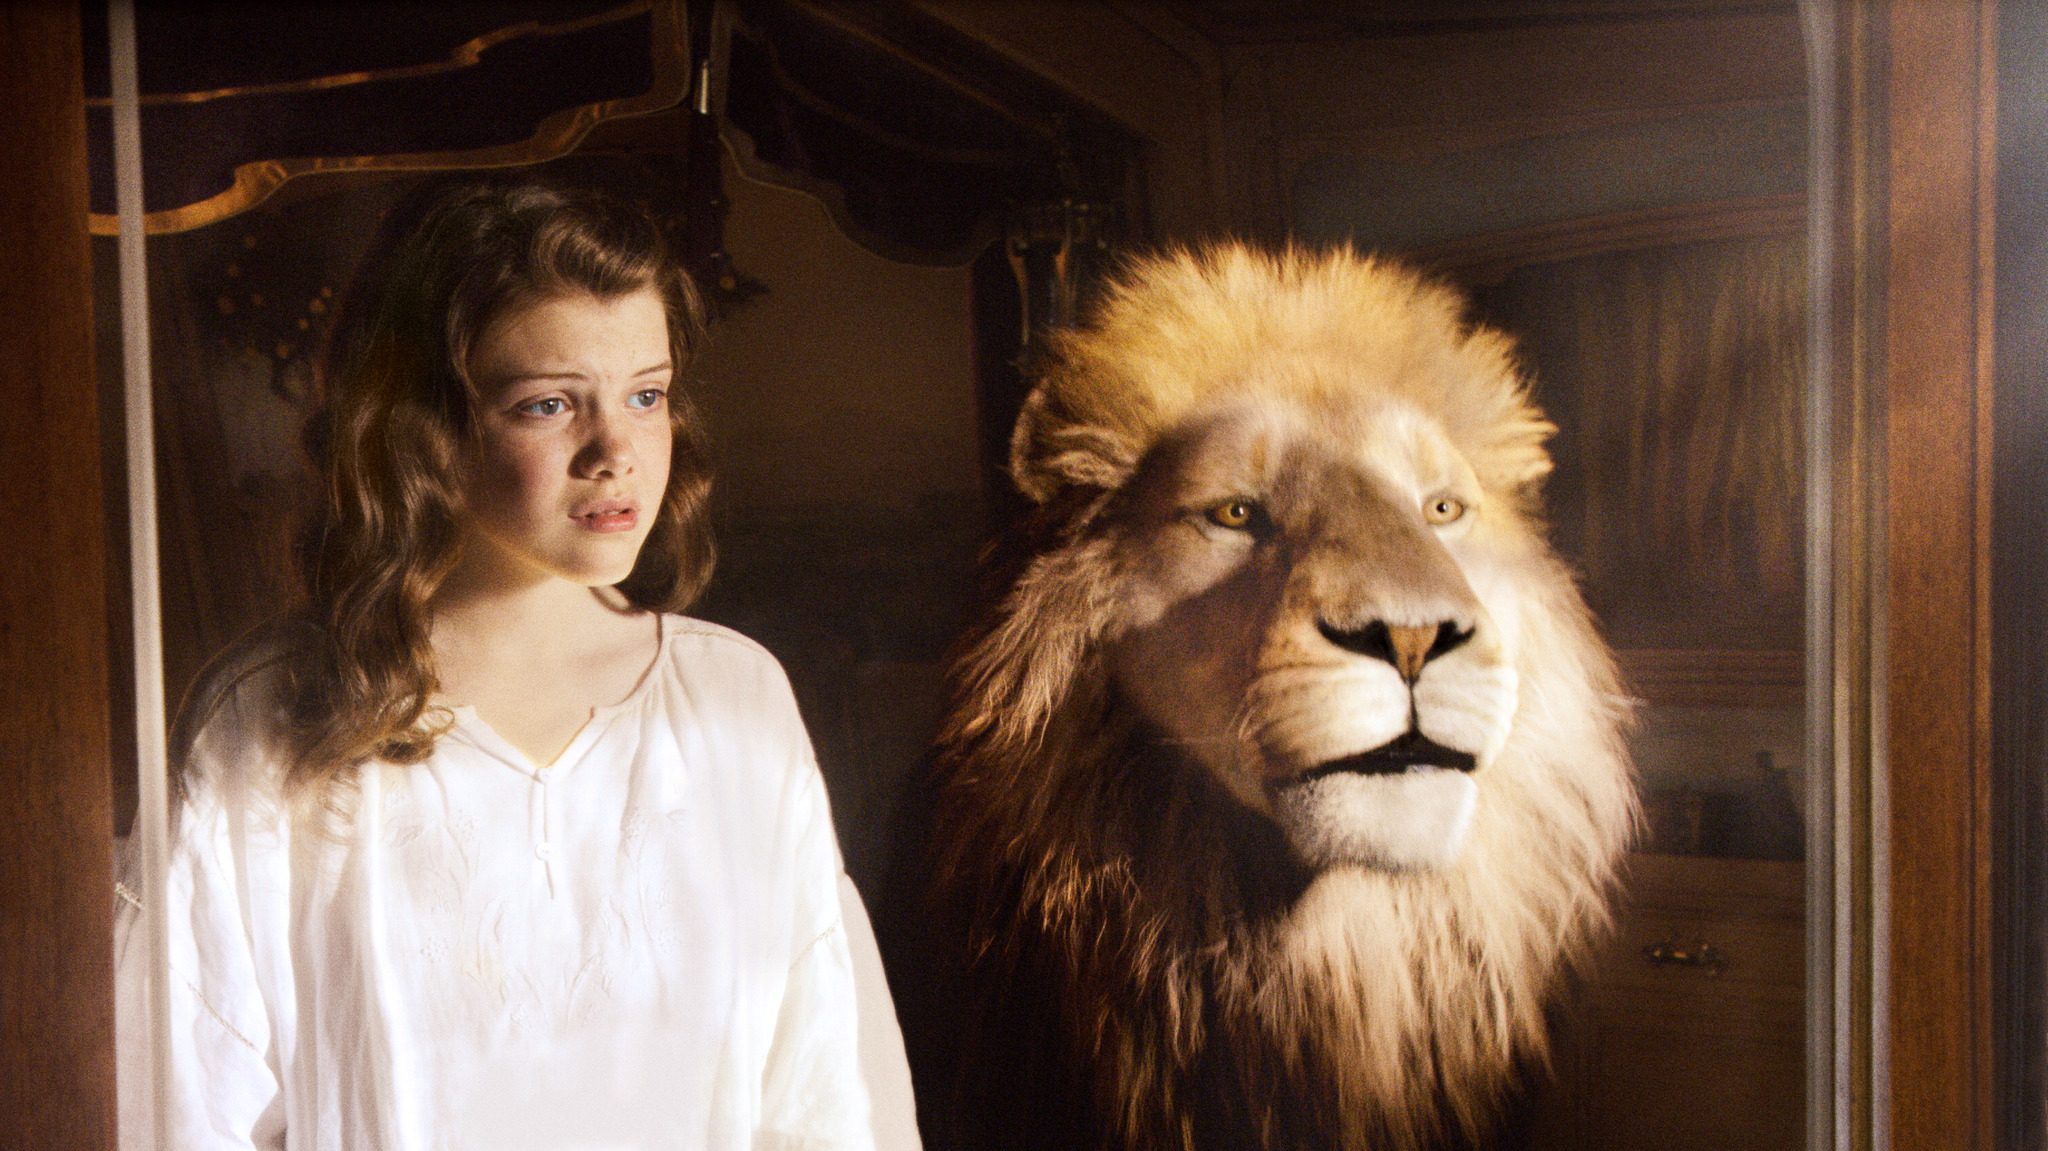 The Chronicles Of Narnia- The Voyage Of The Dawn Treader (2010)